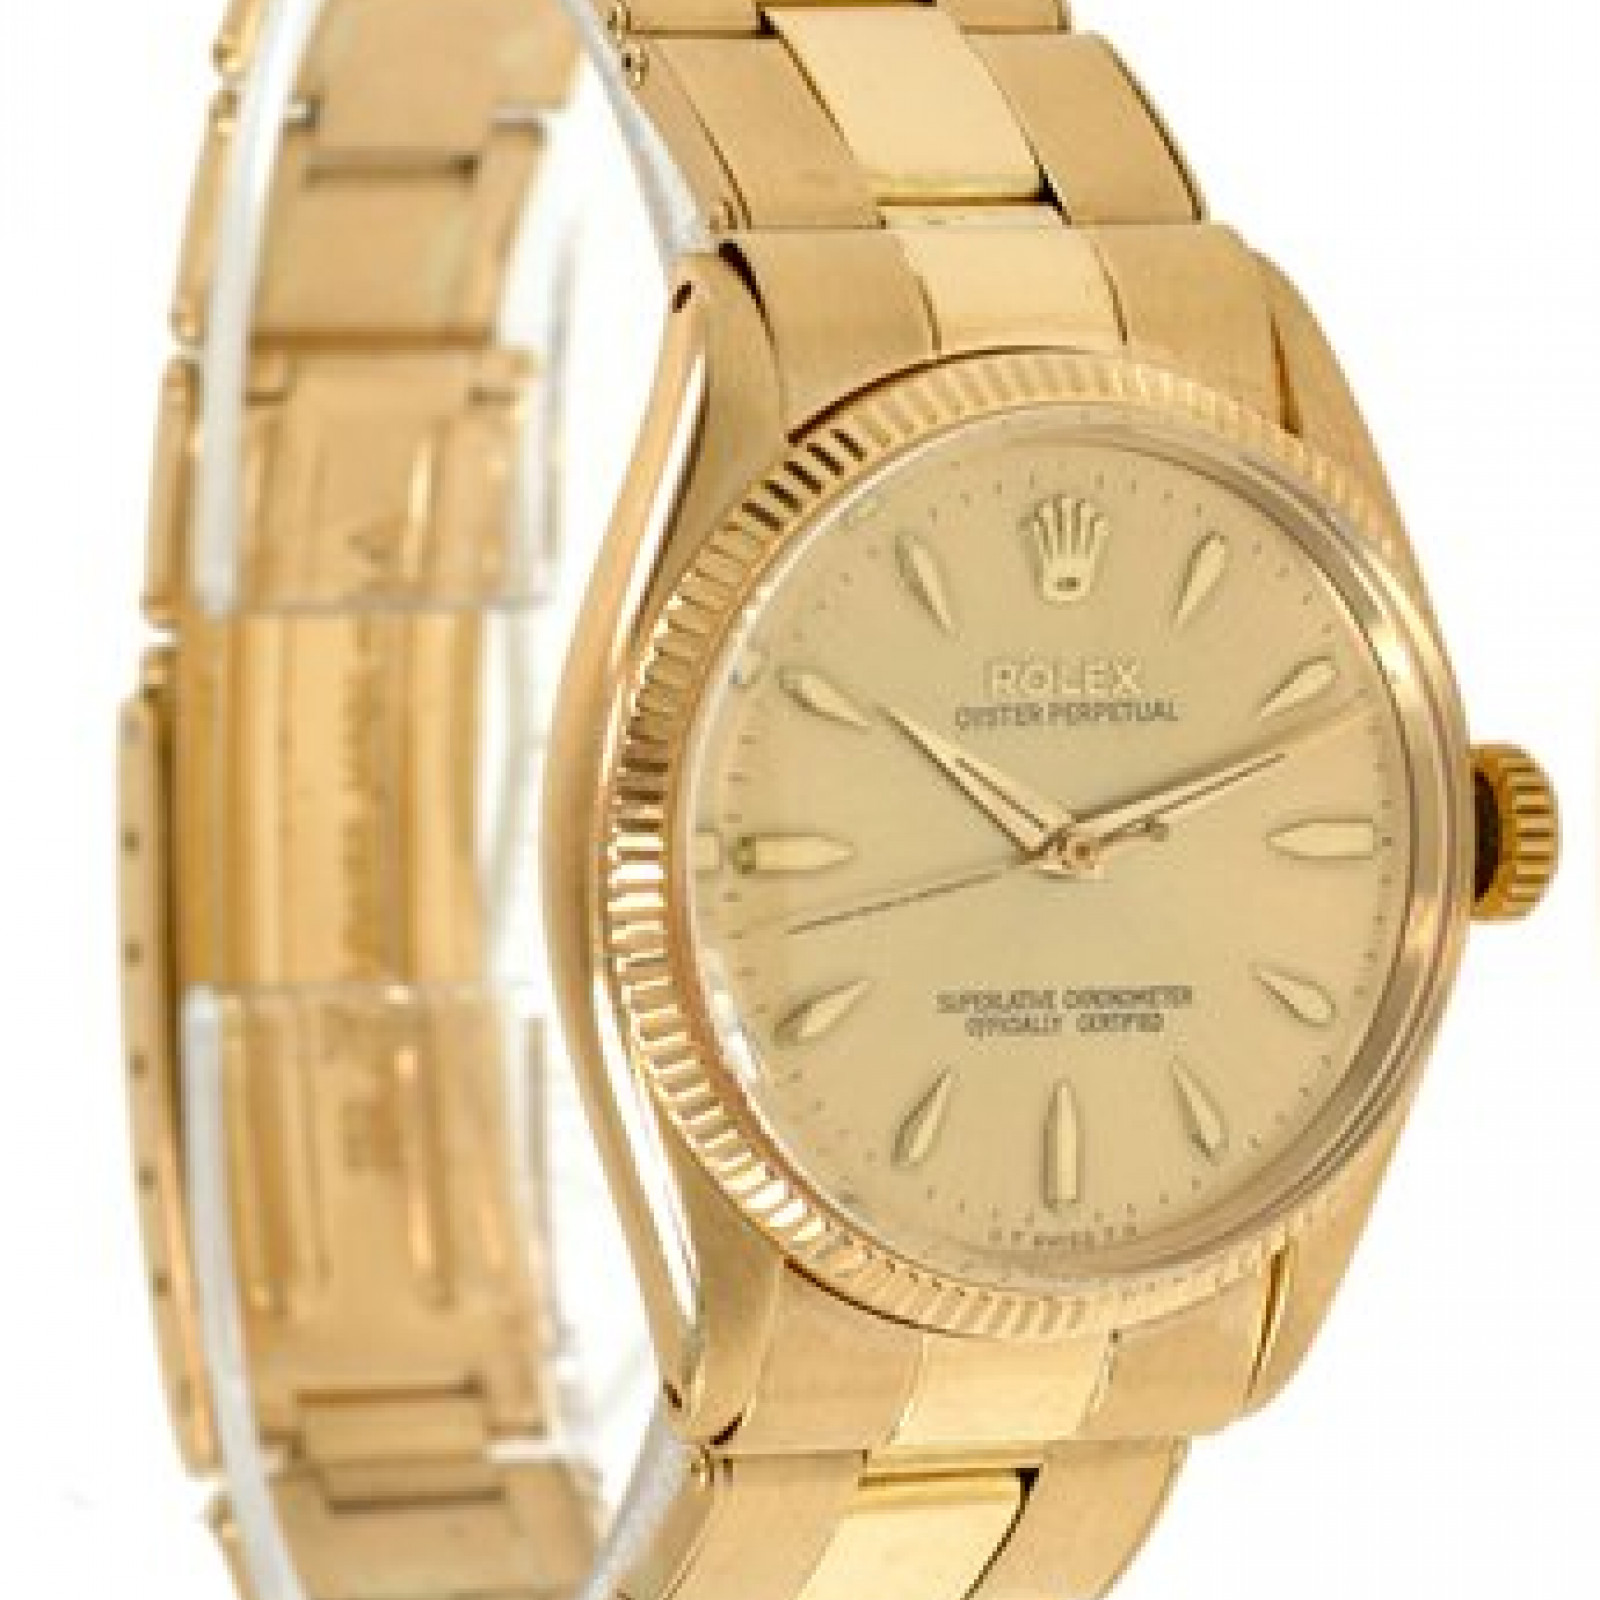 Vintage Rolex Oyster Perpetual 6567 Gold